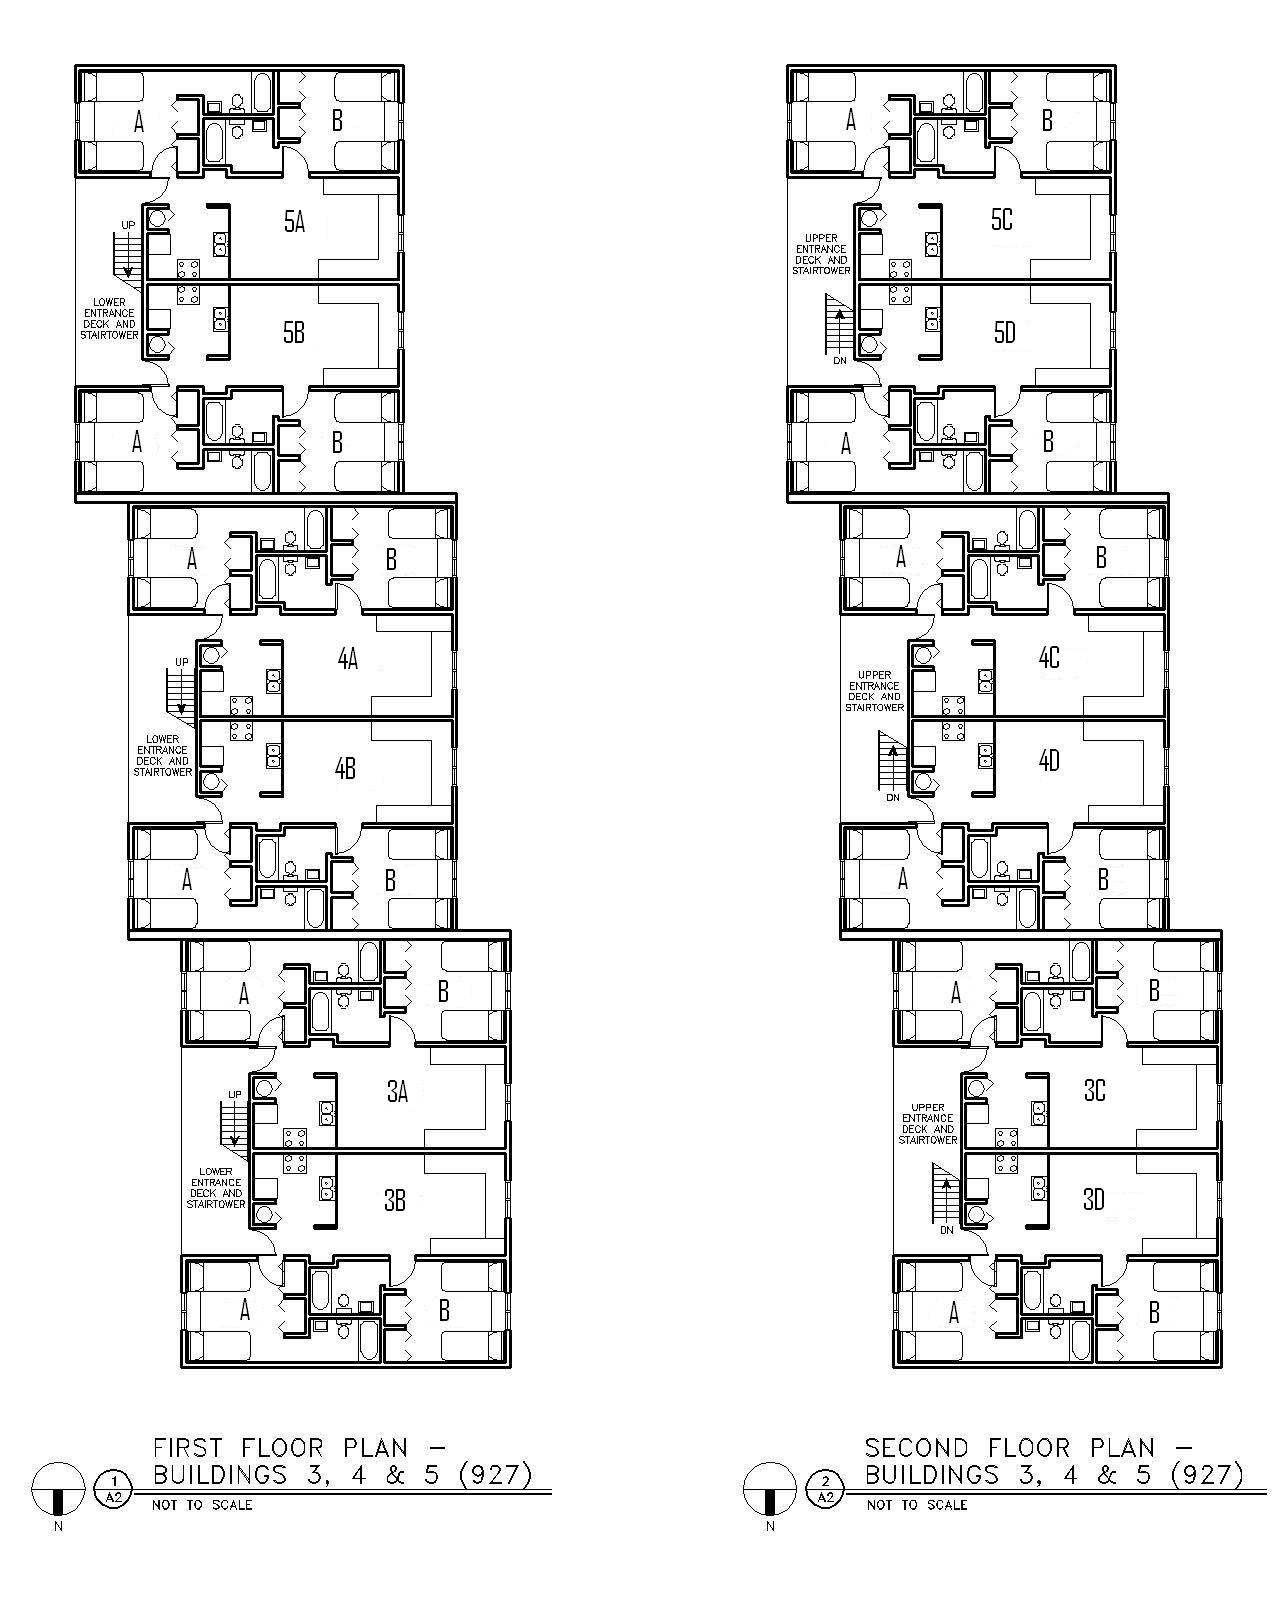 Floor Plan for Buildings 3, 4, and 5